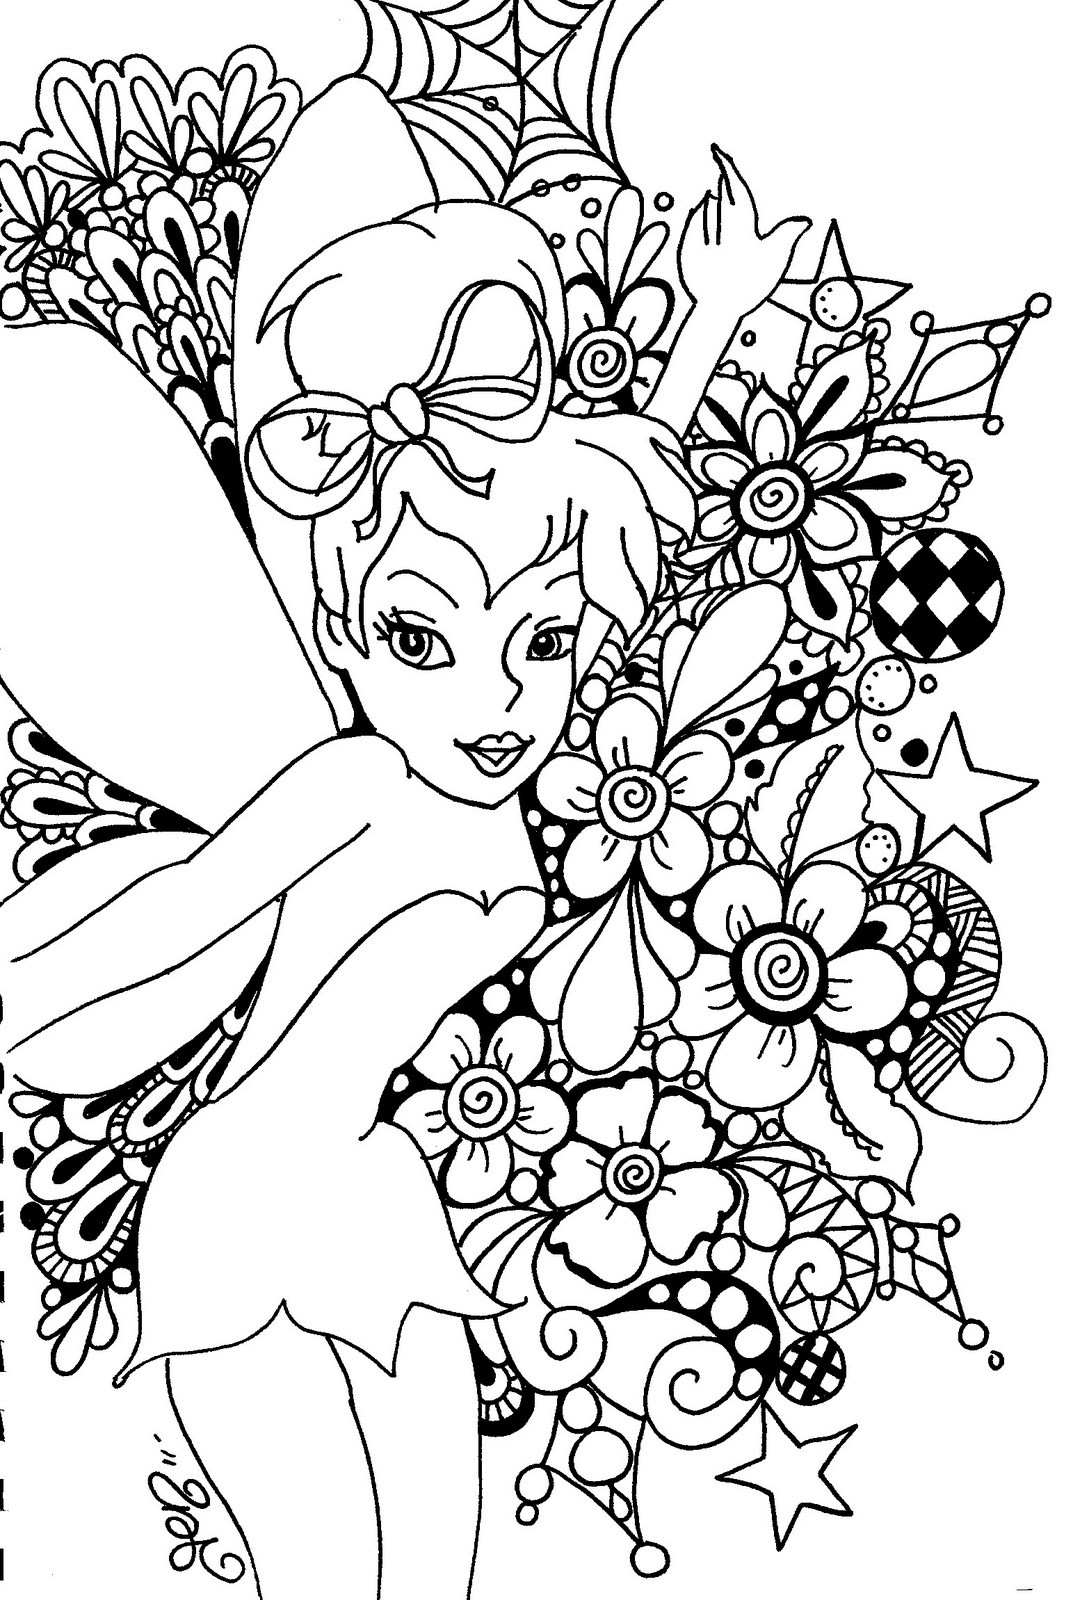 Printable Fairy Coloring Pages For Adults
 FAIRY COLORING PAGES